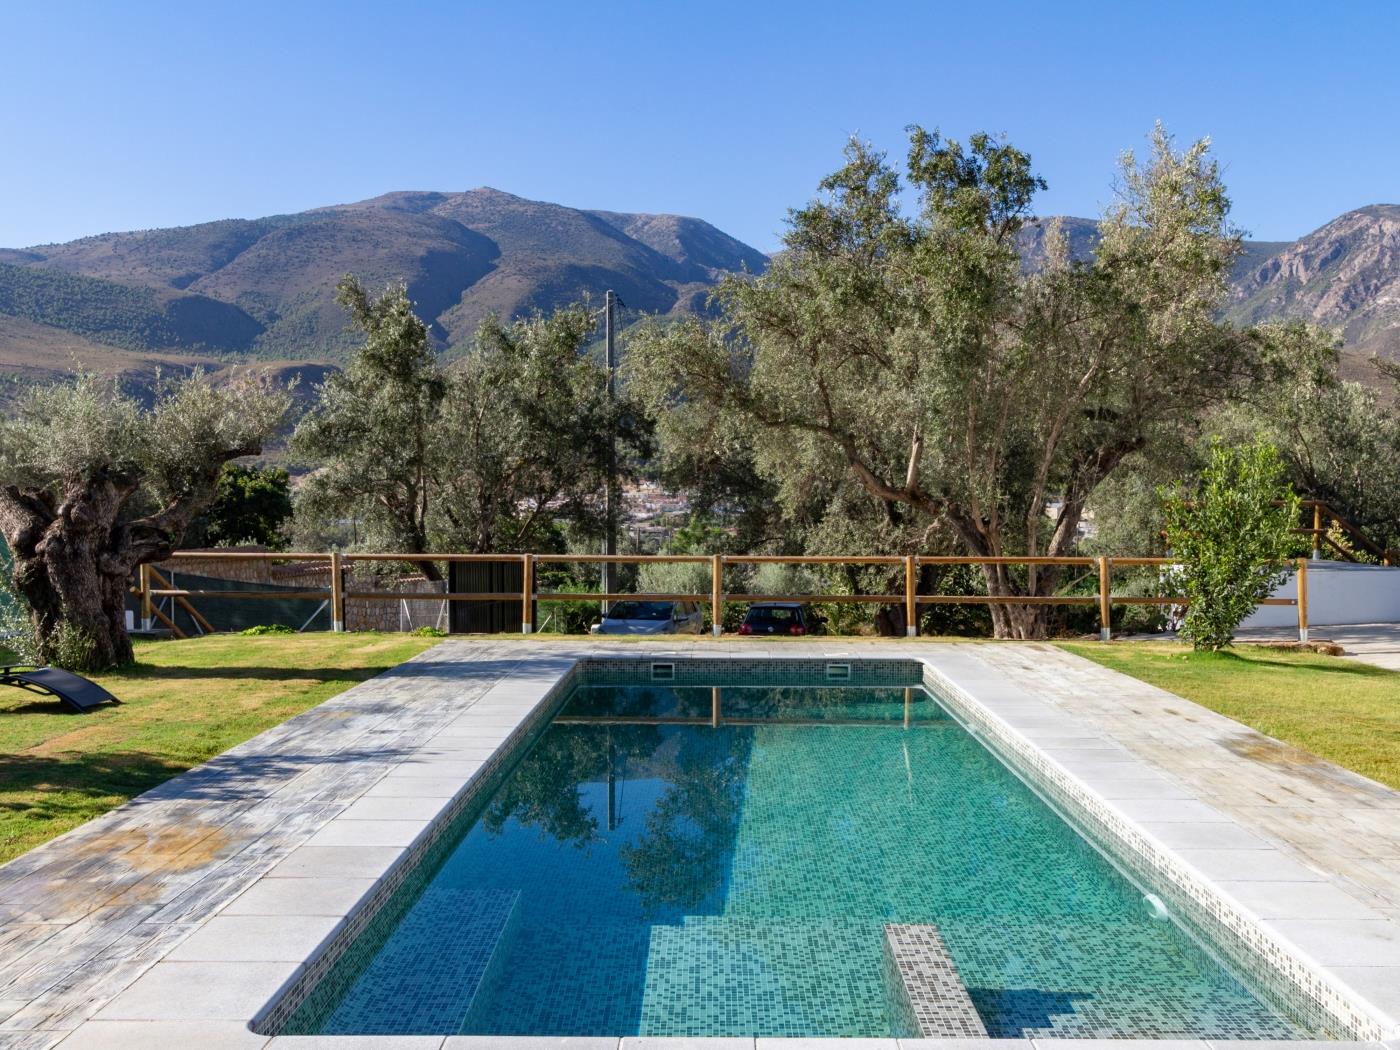 Charming farmhouse in the Alpujarra with private pool, garden and wifi in Órgiva